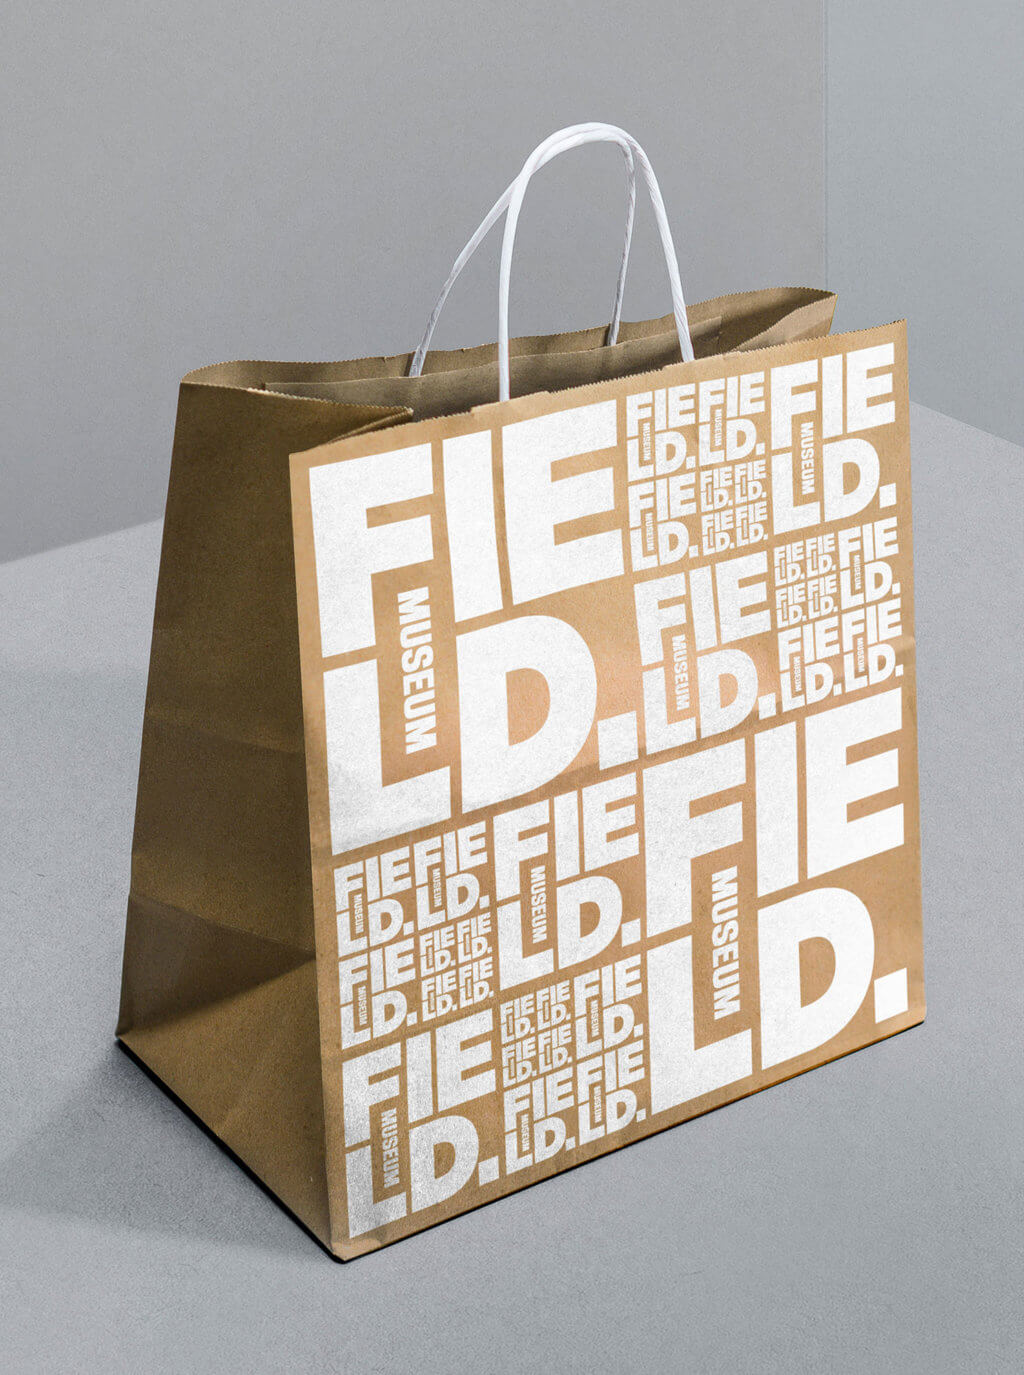 The Field Museum's logo is duplicated multiple times in white to cover the front side of a brown paper shopping bag.